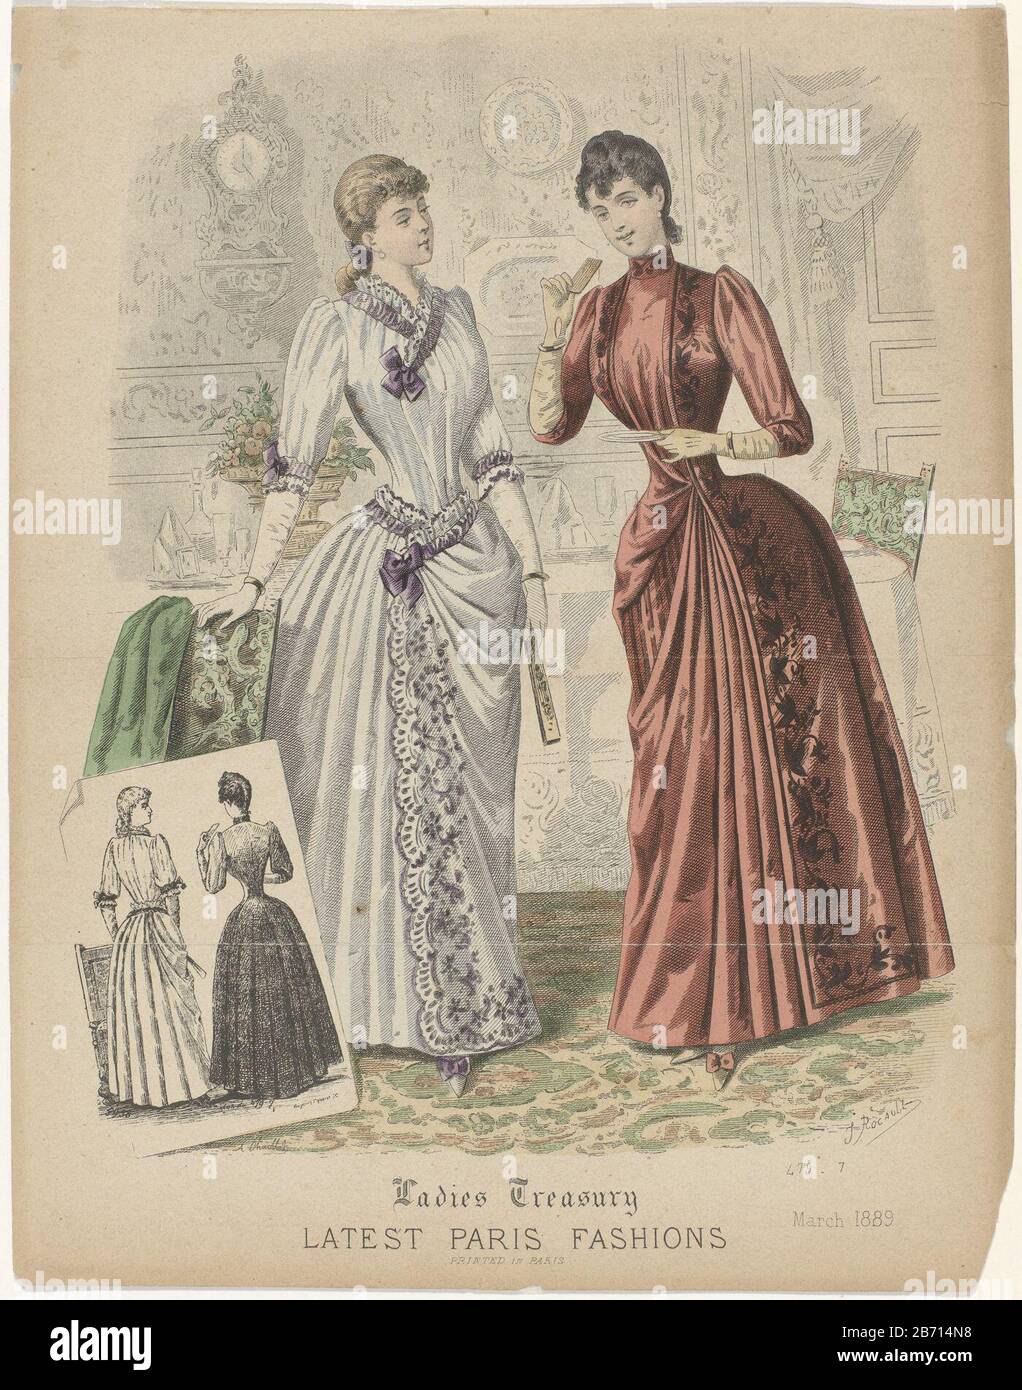 Ladies Treasury, March 1889 Latest Paris Fashions Two women in the latest  fashions from Paris. Left a dress with half sleeves. Skirt with wrap with  floral pattern. Purple tie at neck, cuffs